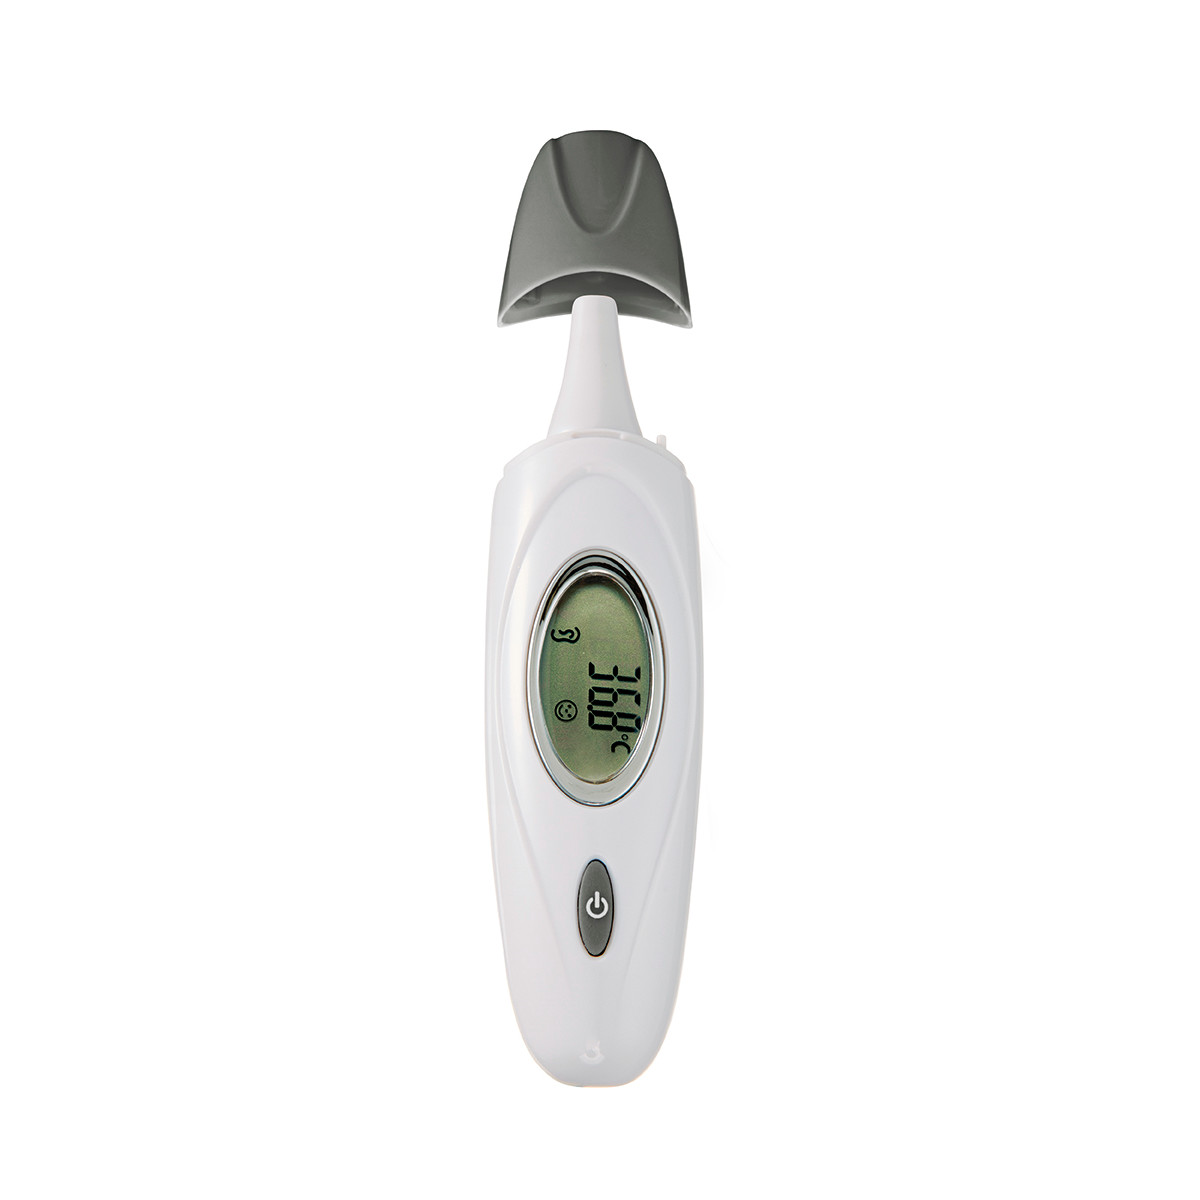 SkinTemp 3in1 infrared thermometer